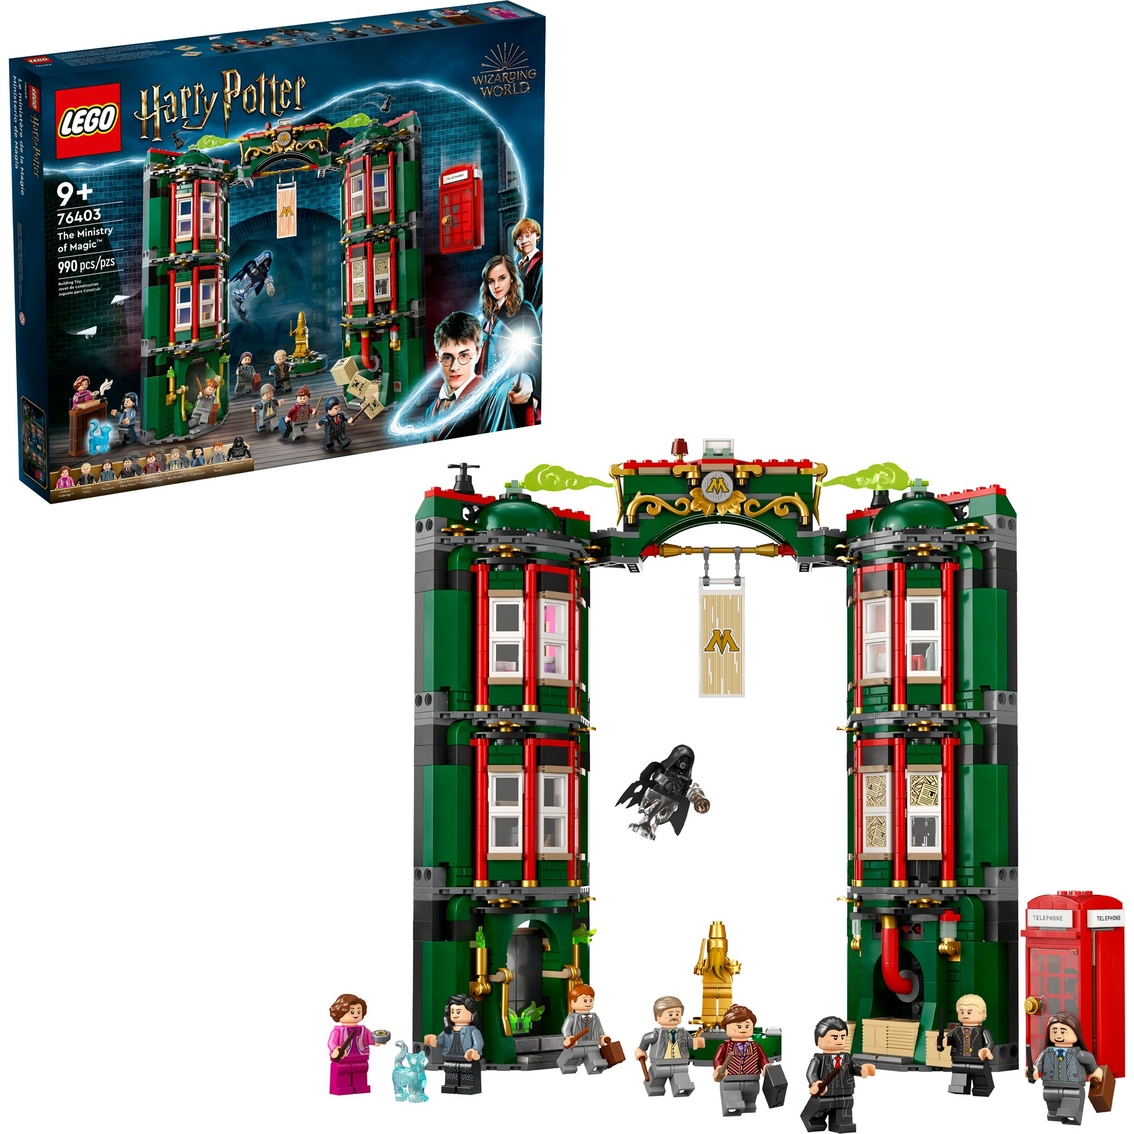 LEGO Harry Potter The Ministry of Magic 76403 - Image 3 of 3